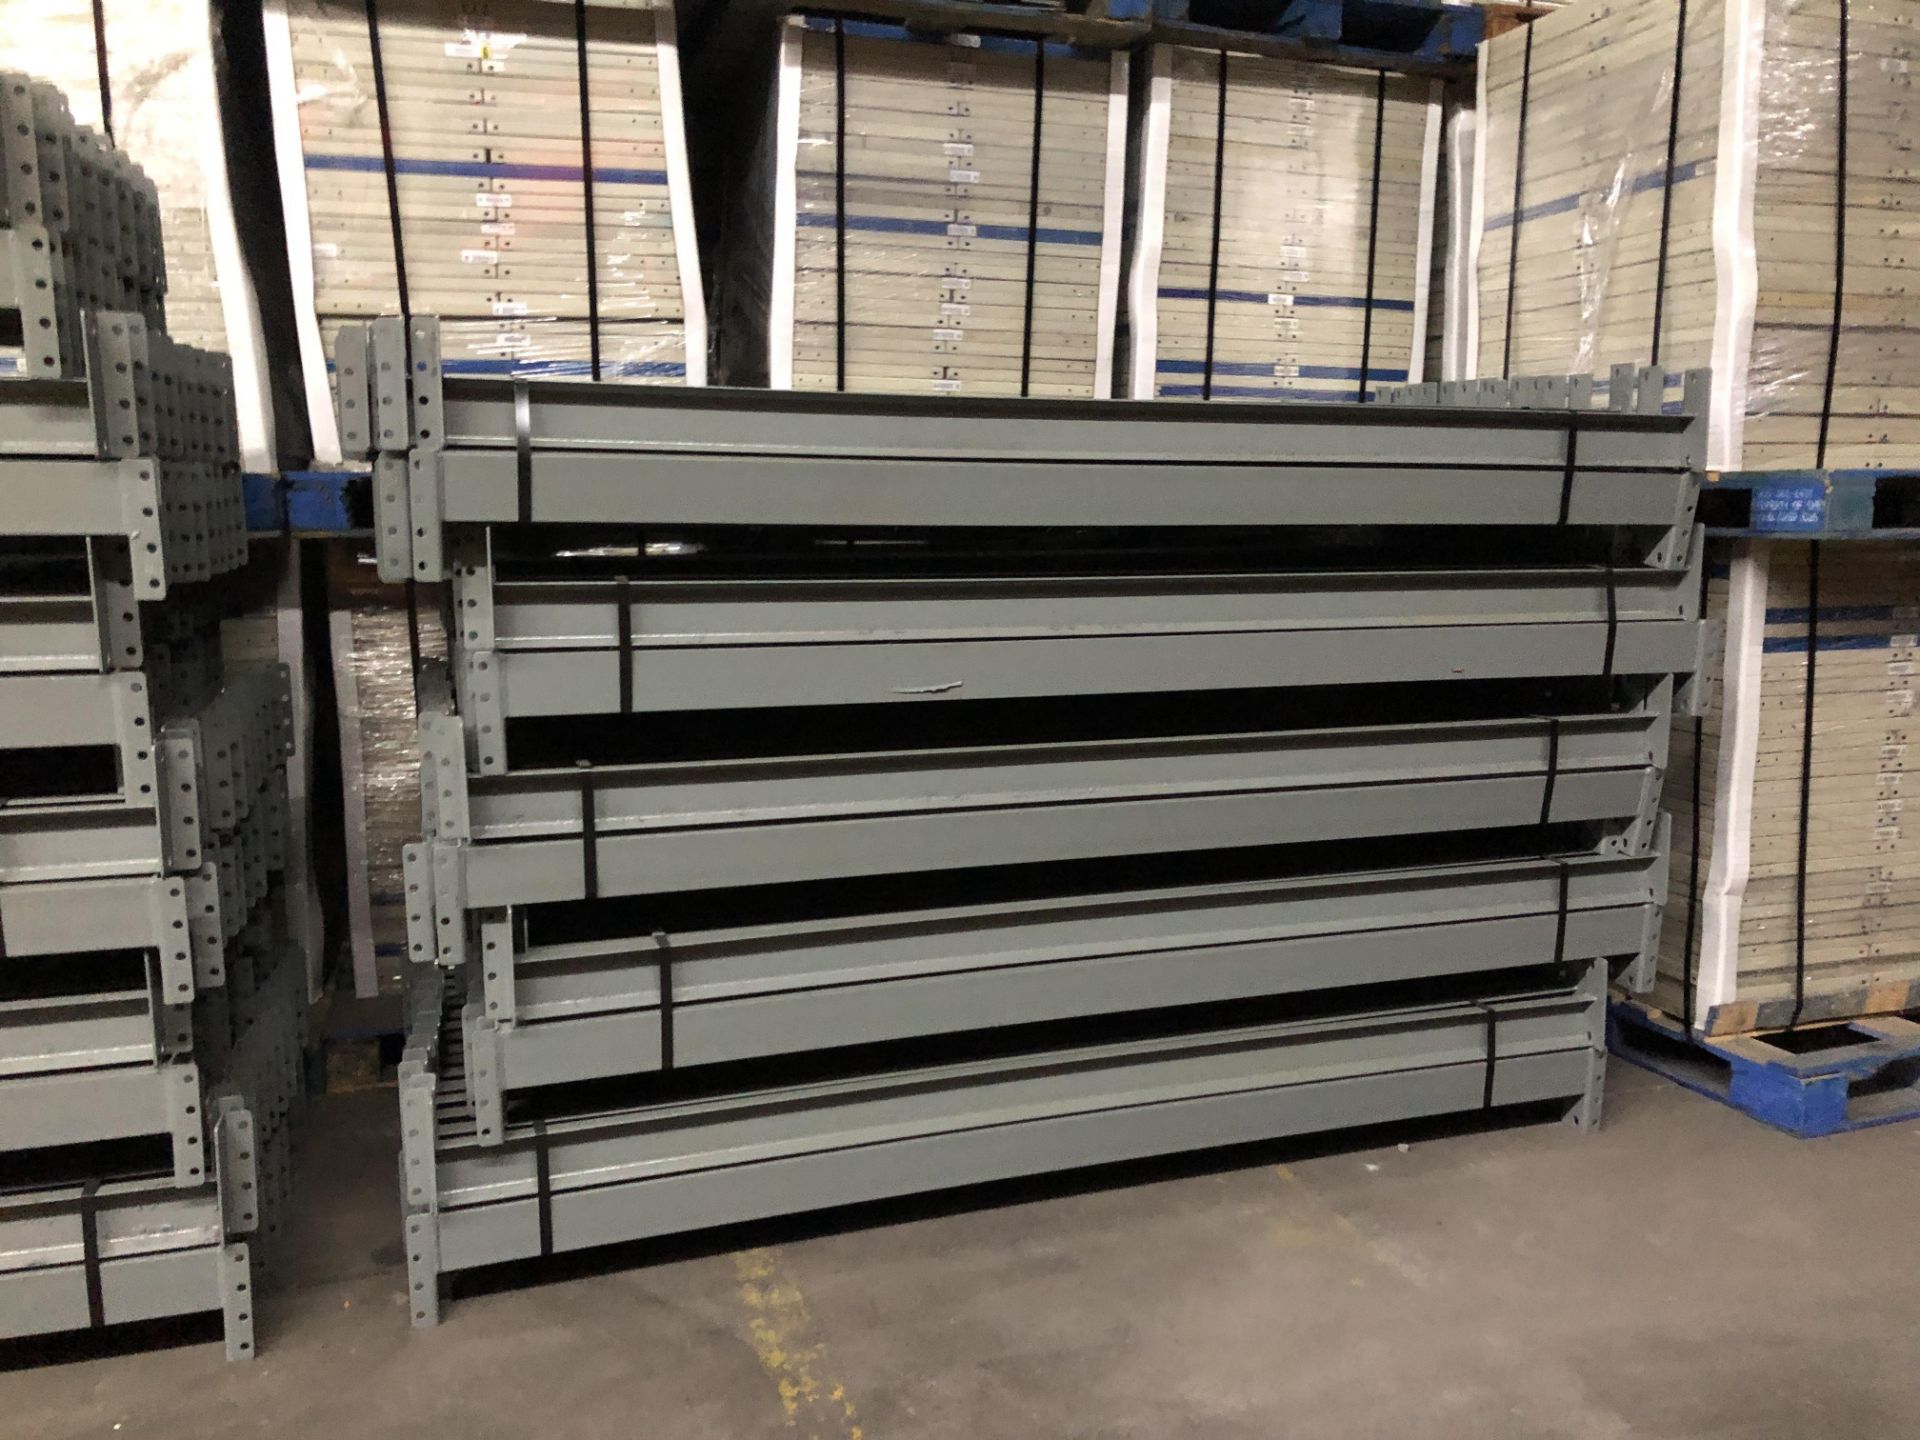 9 BAYS OF 10.5'H X 42"D X 93"L STRUCTURAL STYLE PALLET RACKS - Image 3 of 5